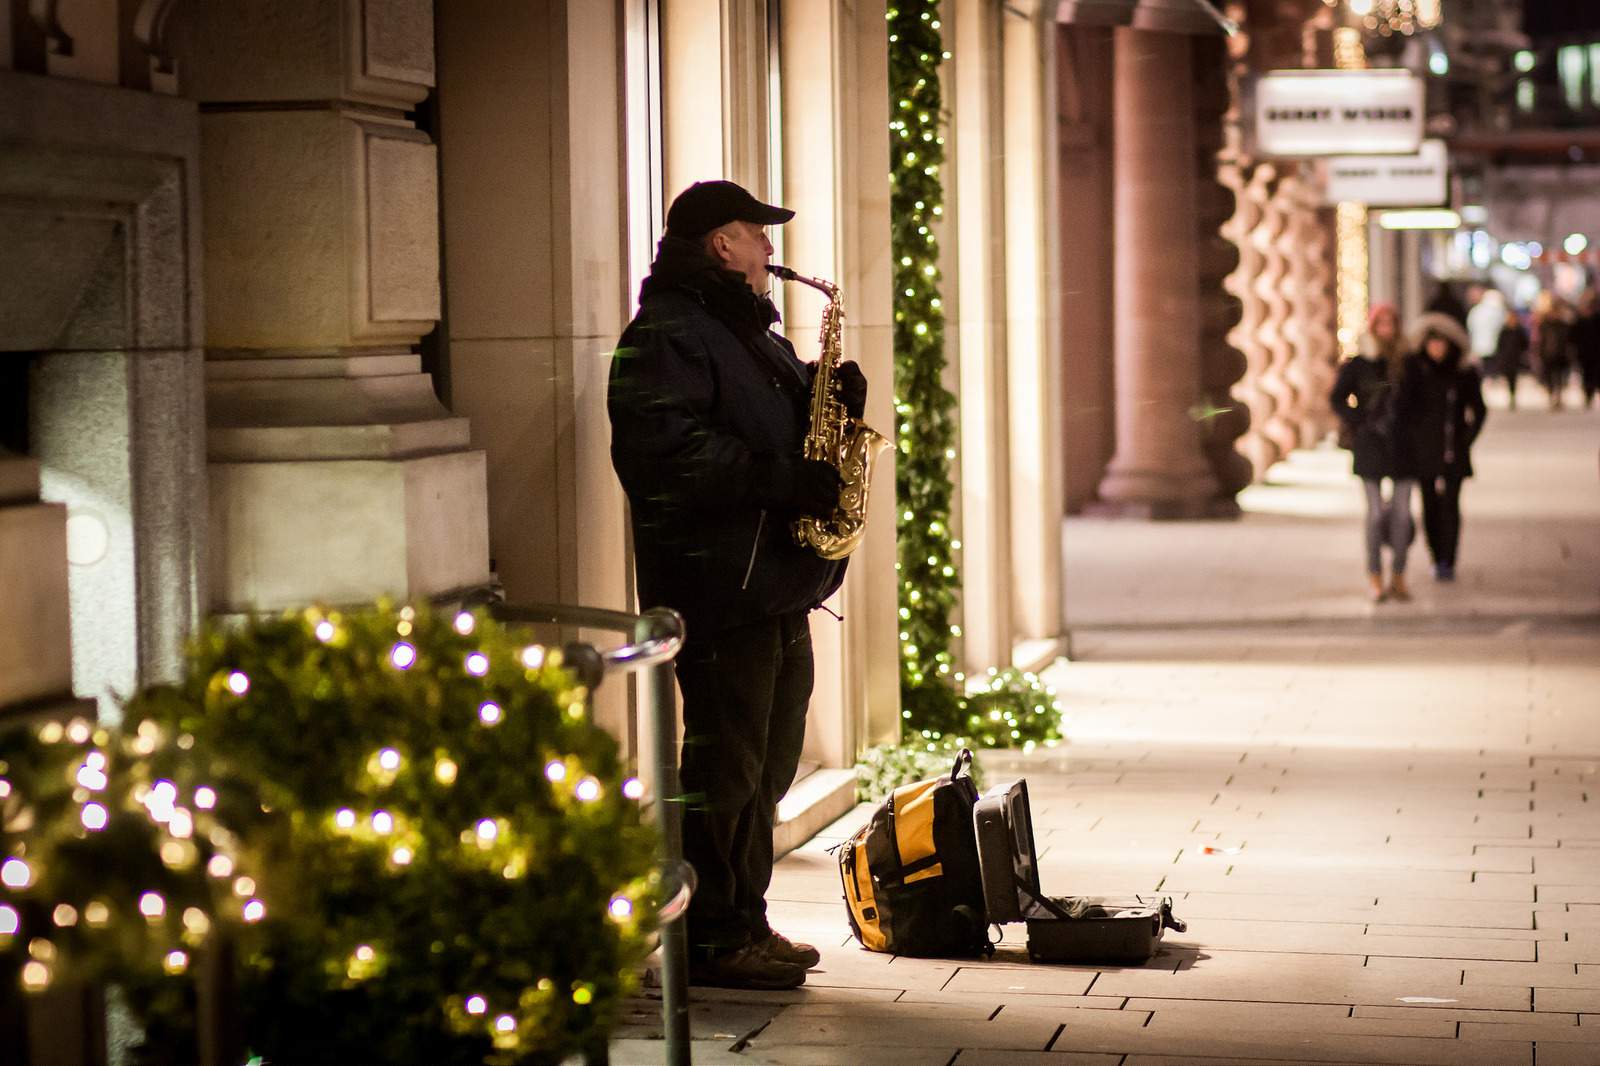 A lone musician playing on the side